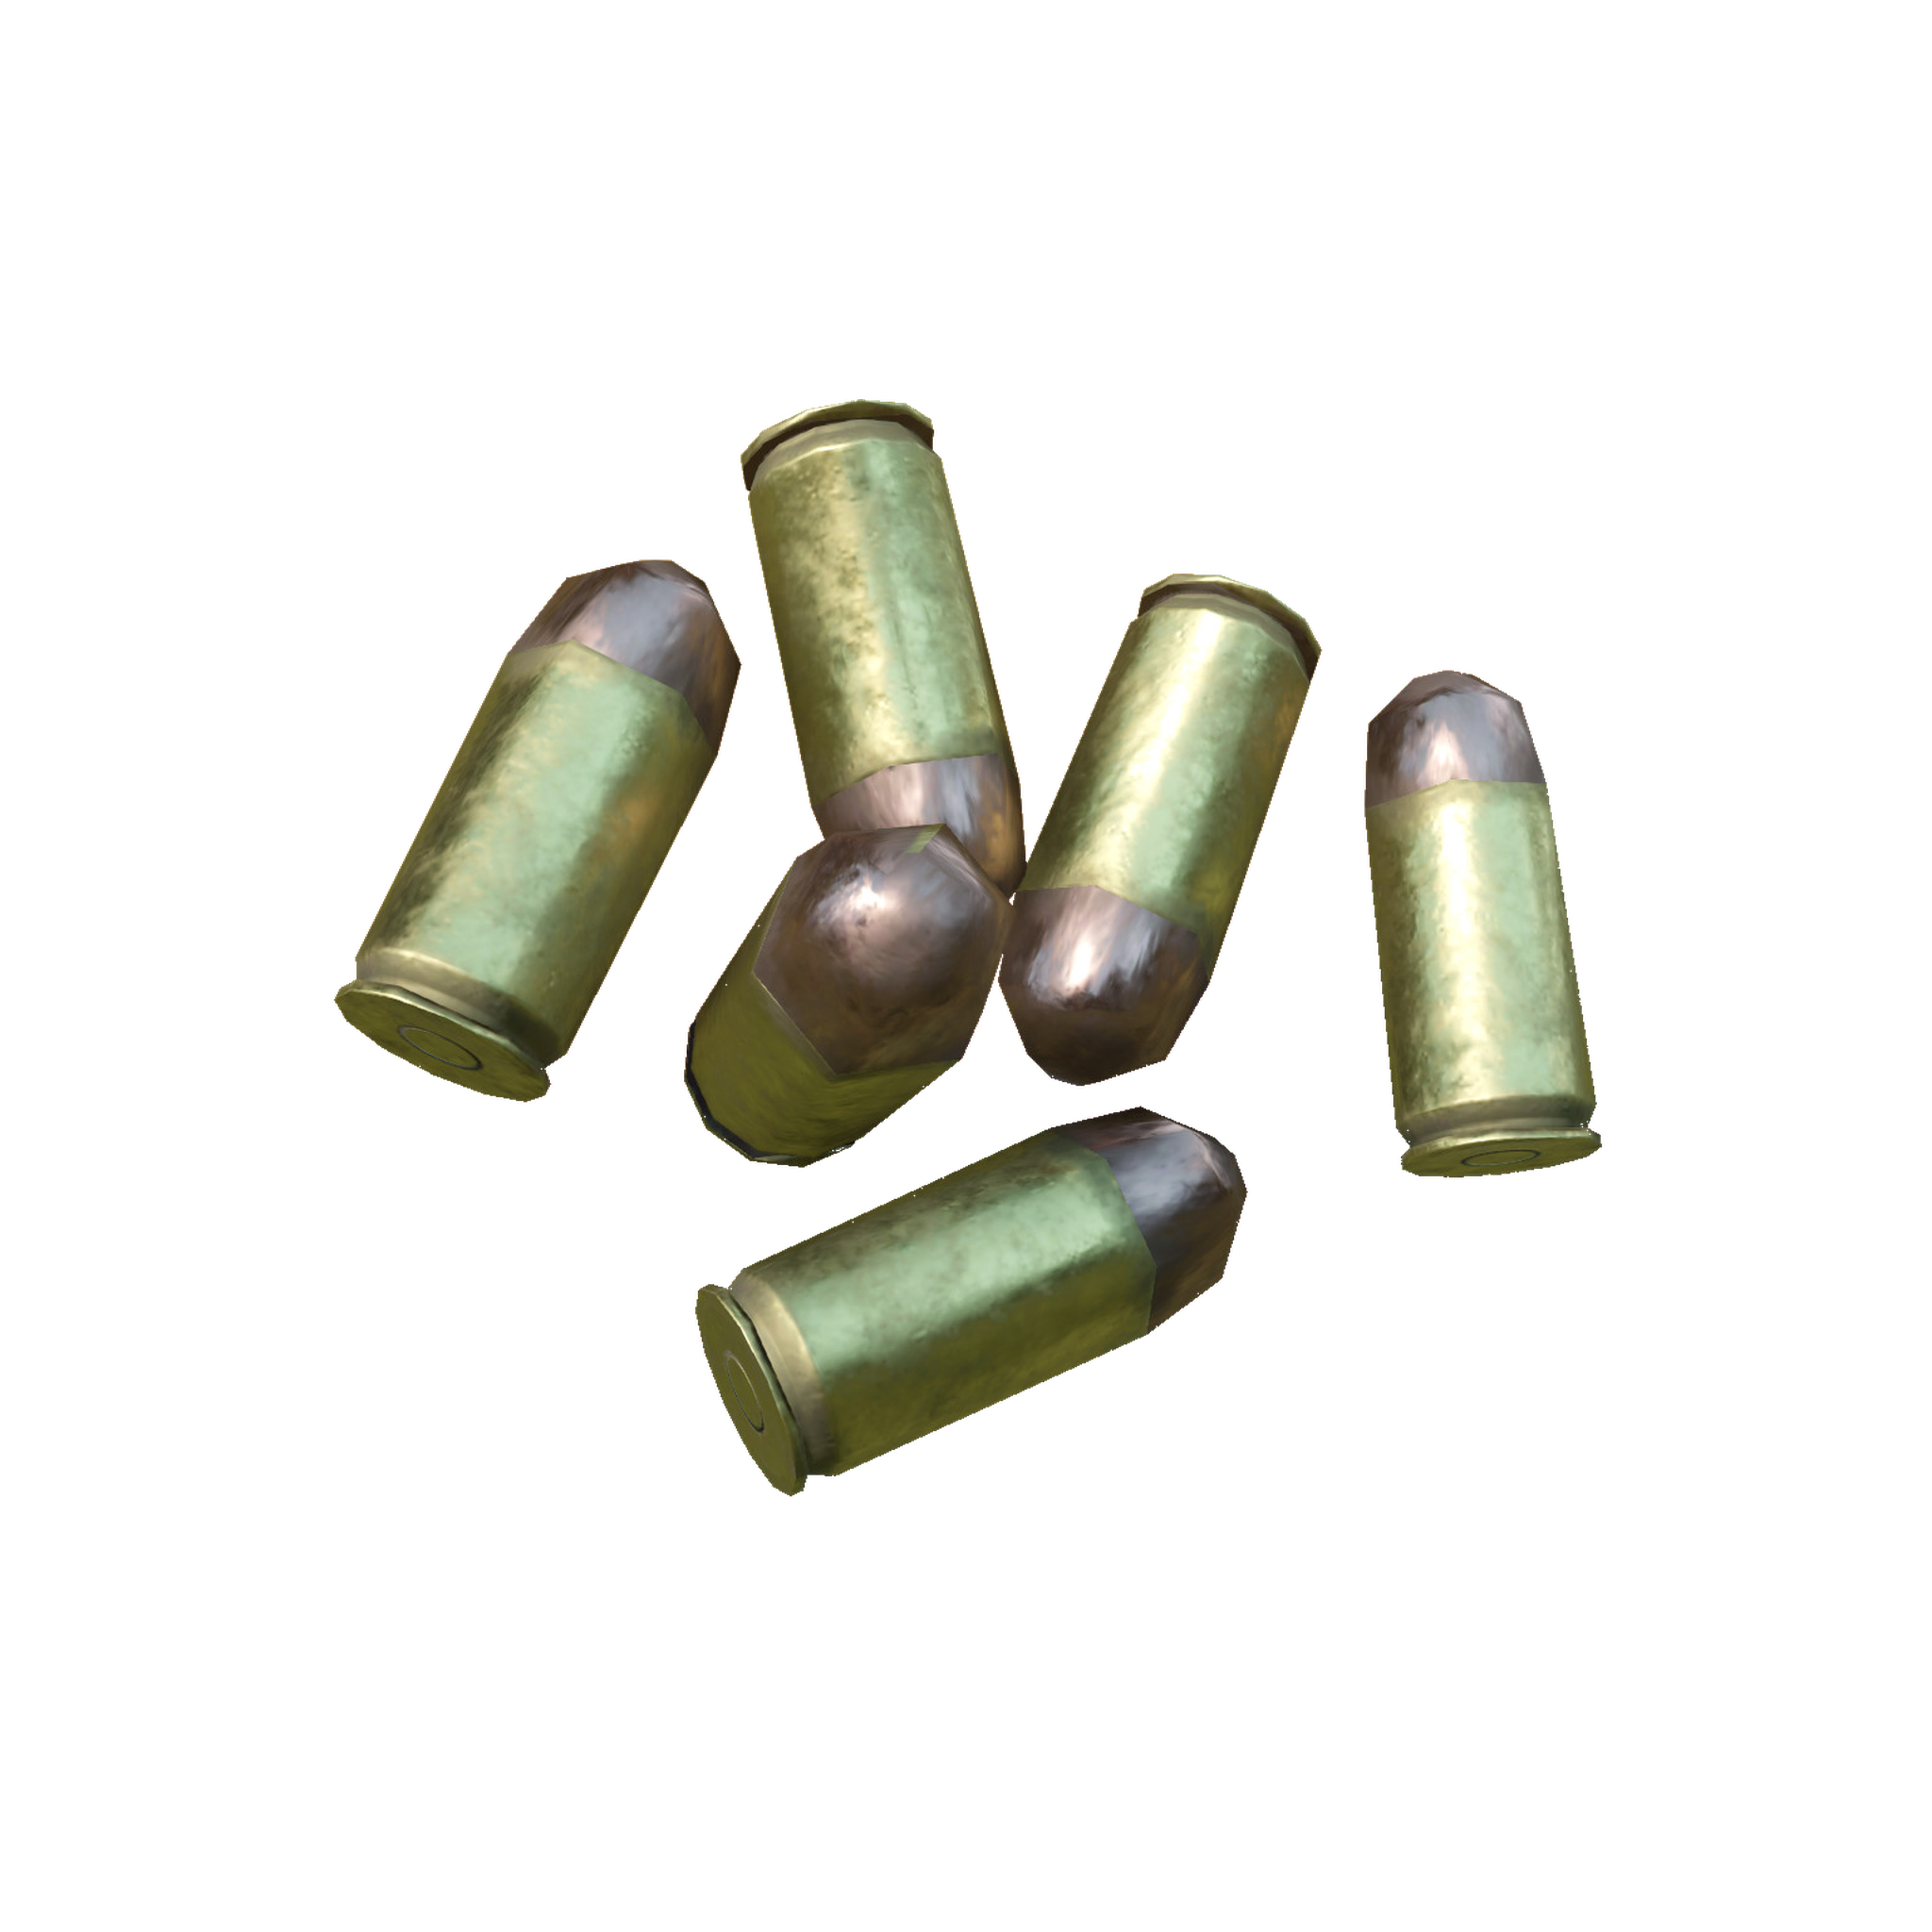 45 ACP Rounds, Miscreated Wiki